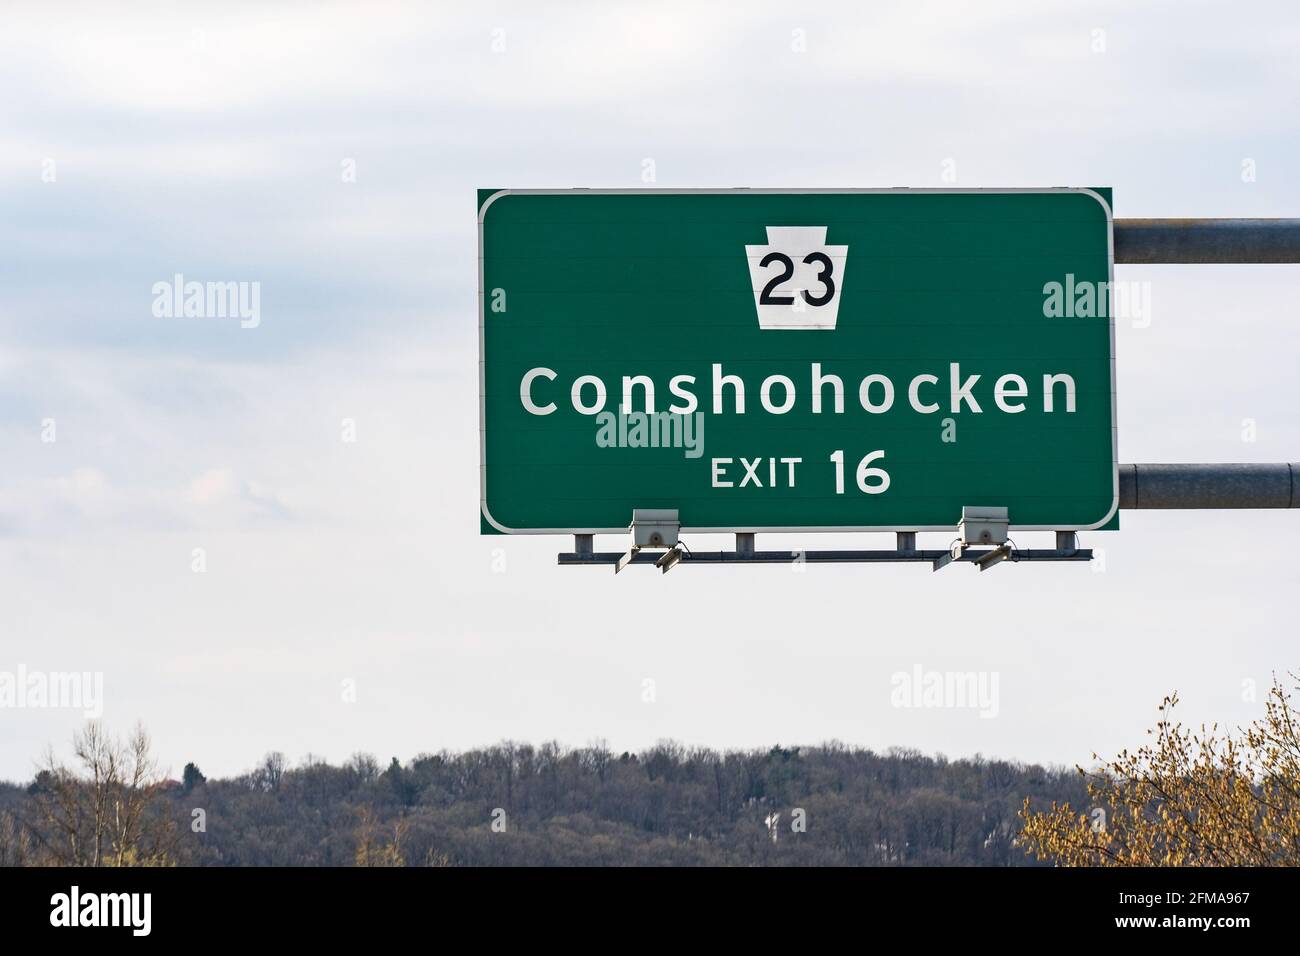 Interstate highway 476 exit 16 sign for route 23 and Conshohocken Pennsylvania Stock Photo